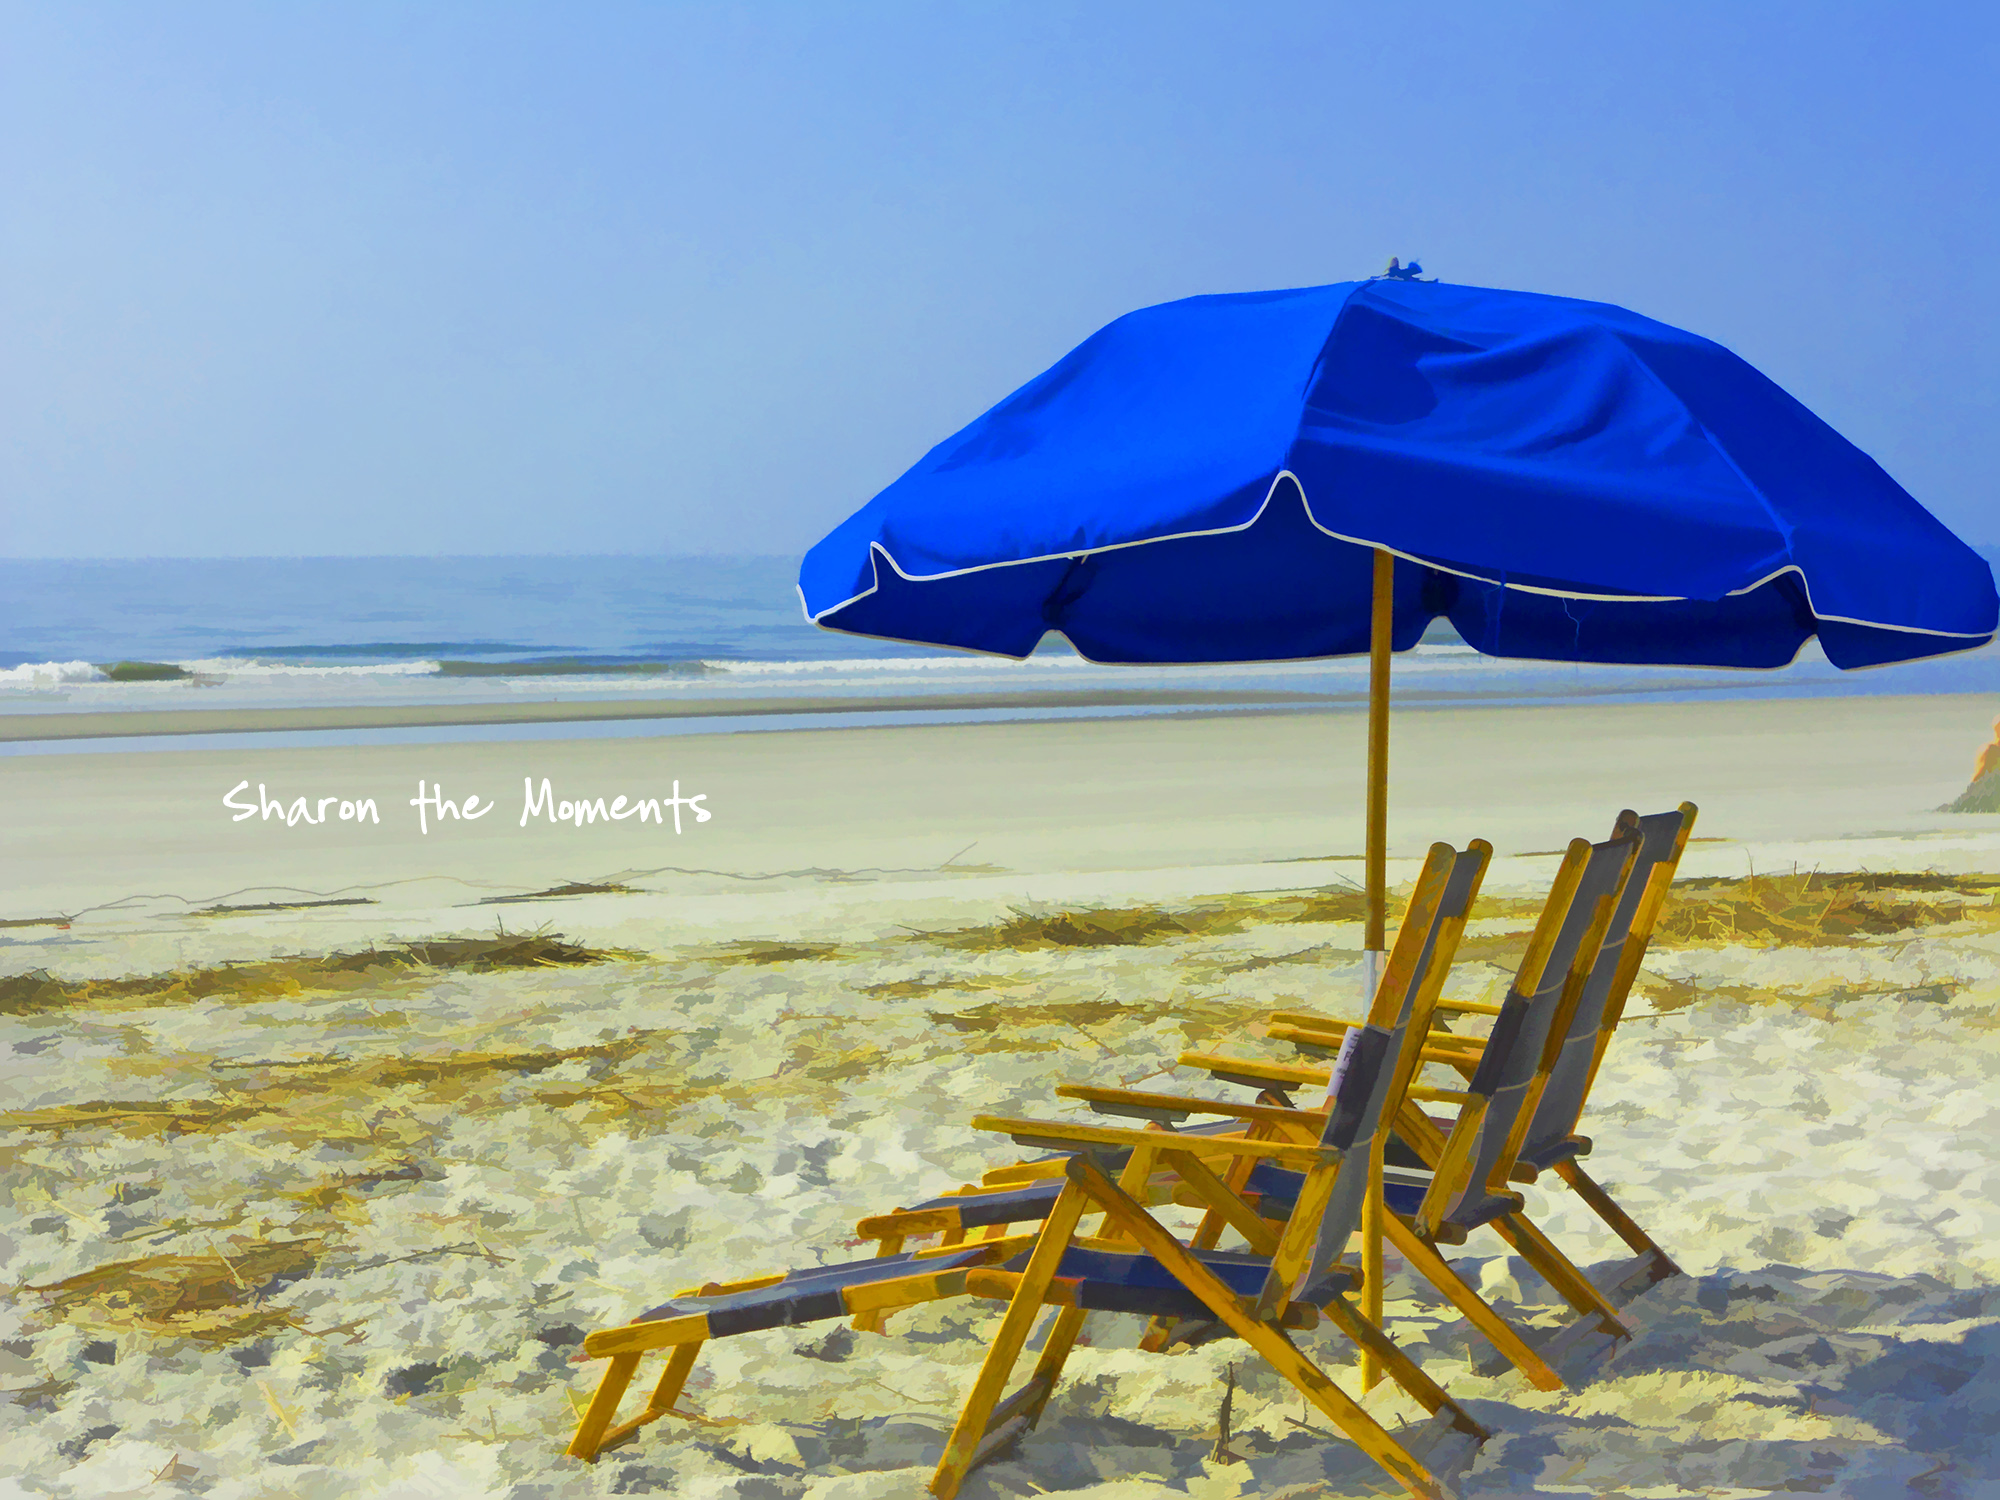 Favorite Photo Friday Hello Friday! Thinking of Sunshine and the Beach|Sharon the Moments blog